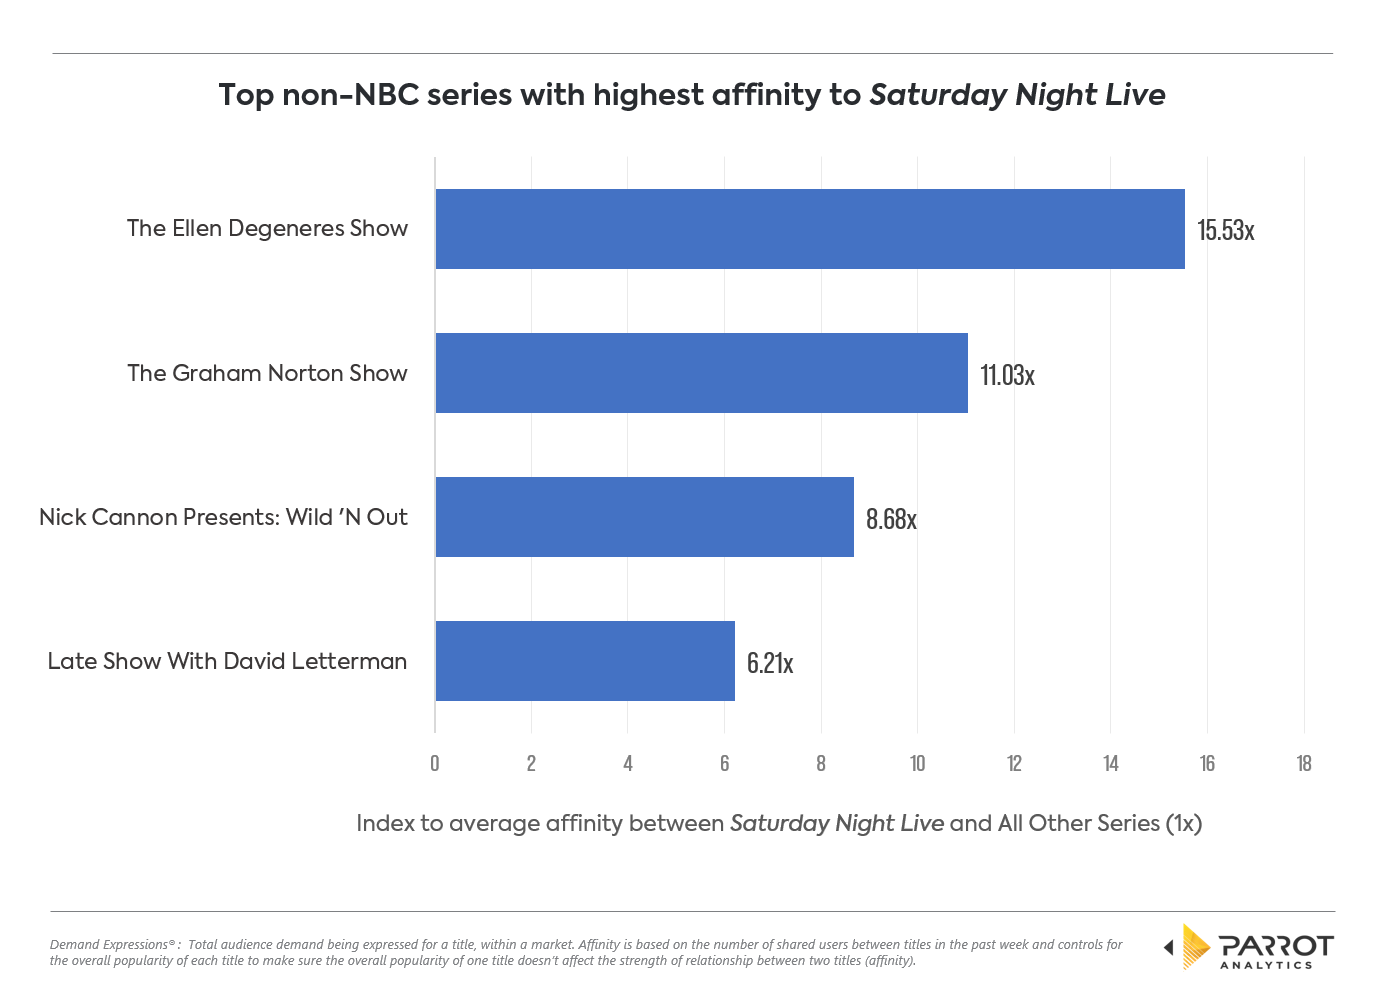 SNL_affinity_non_NBC_shows.png